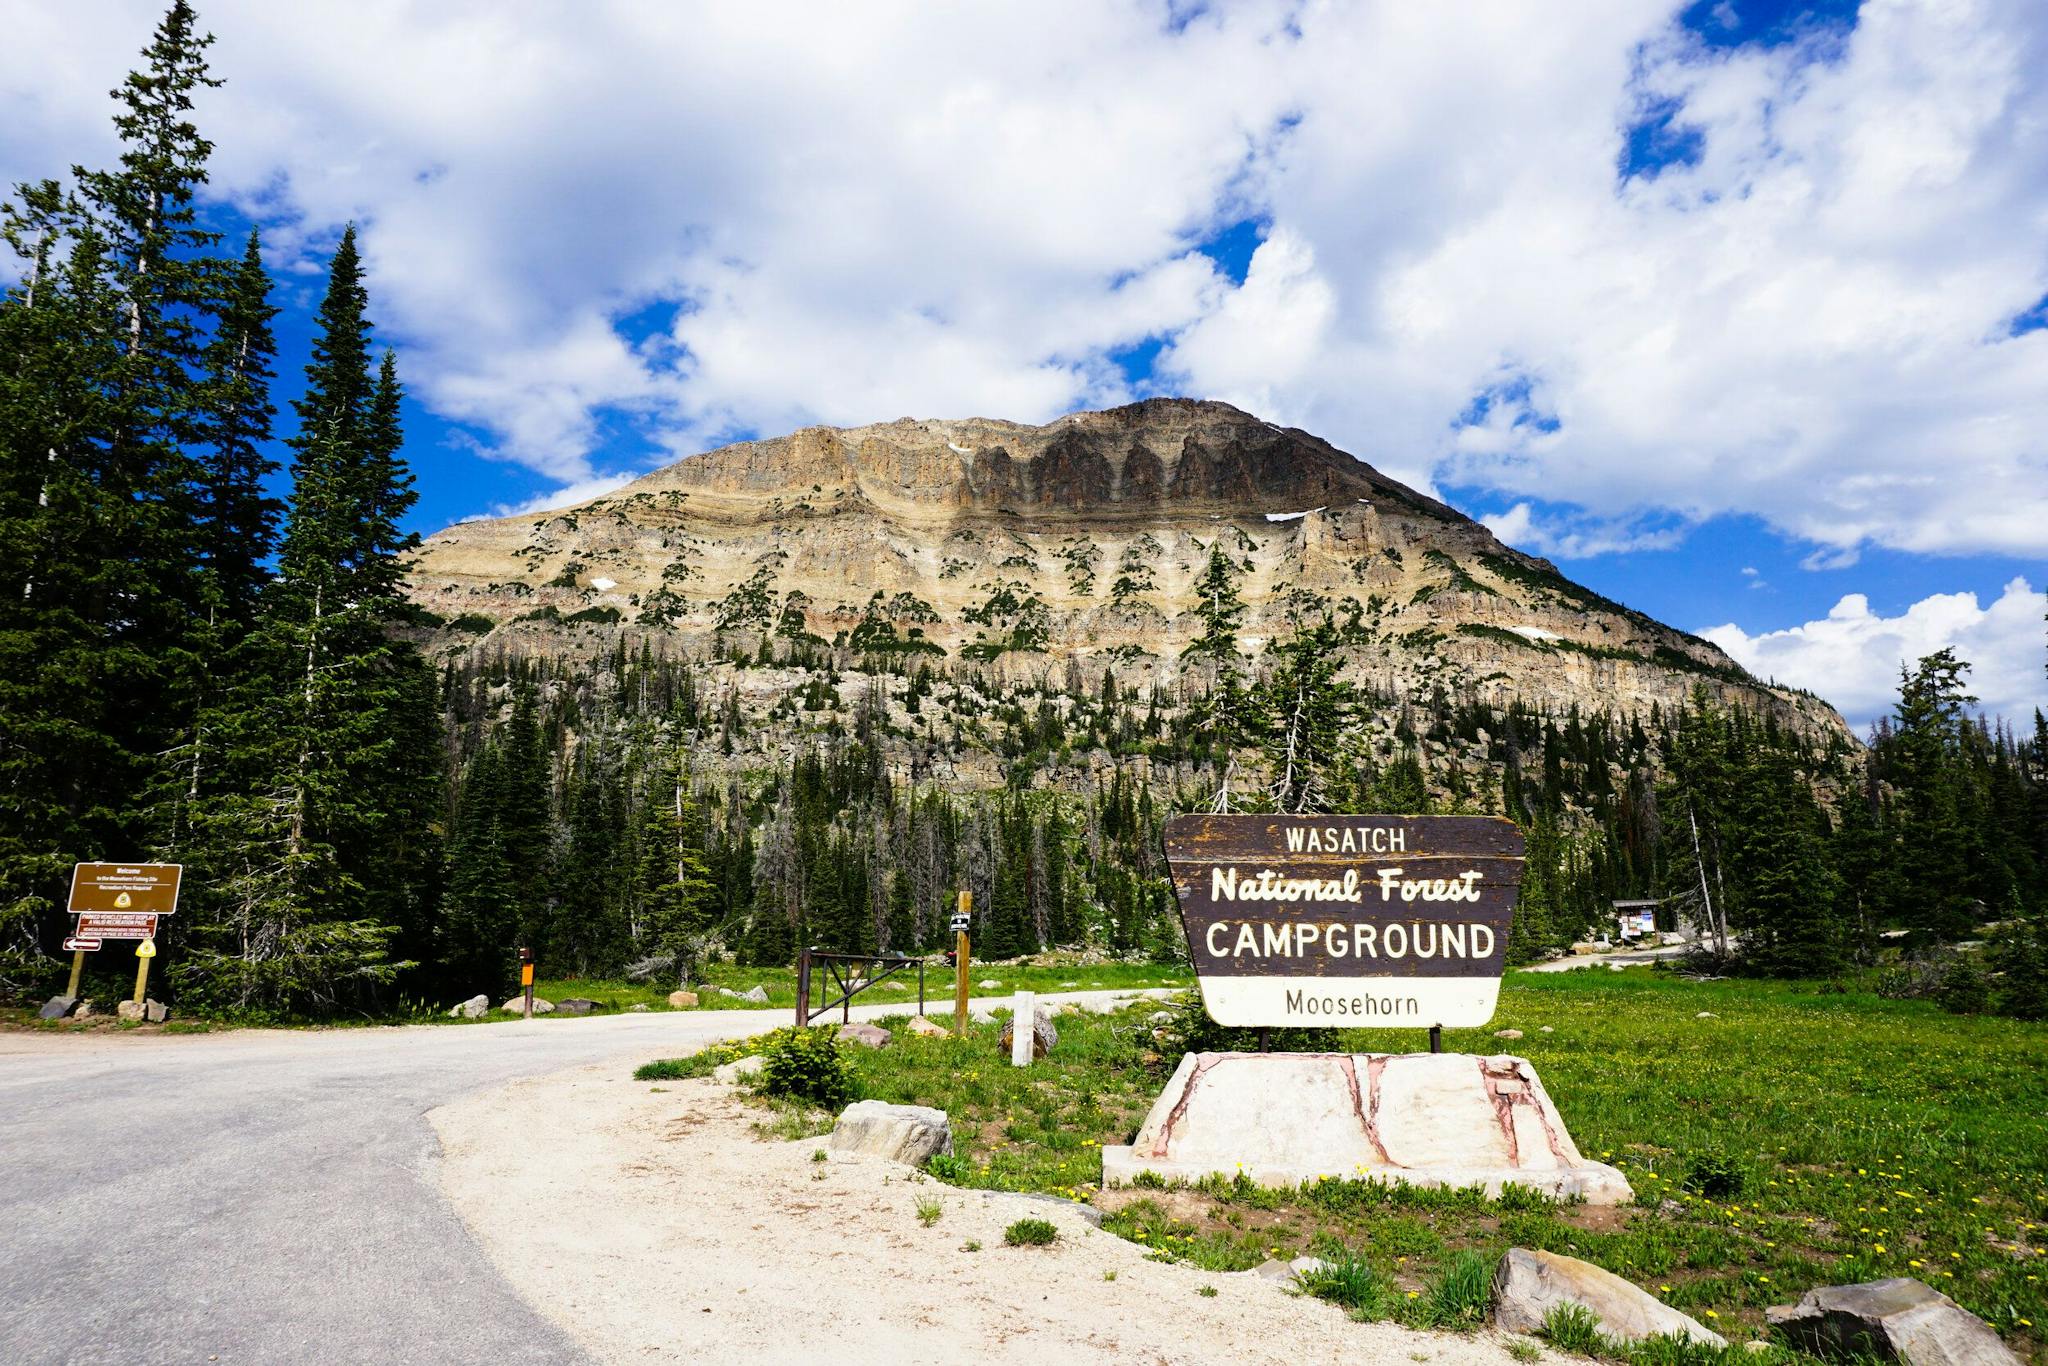 Wasatch National Forest, with blue skies, mountains, and pines on display